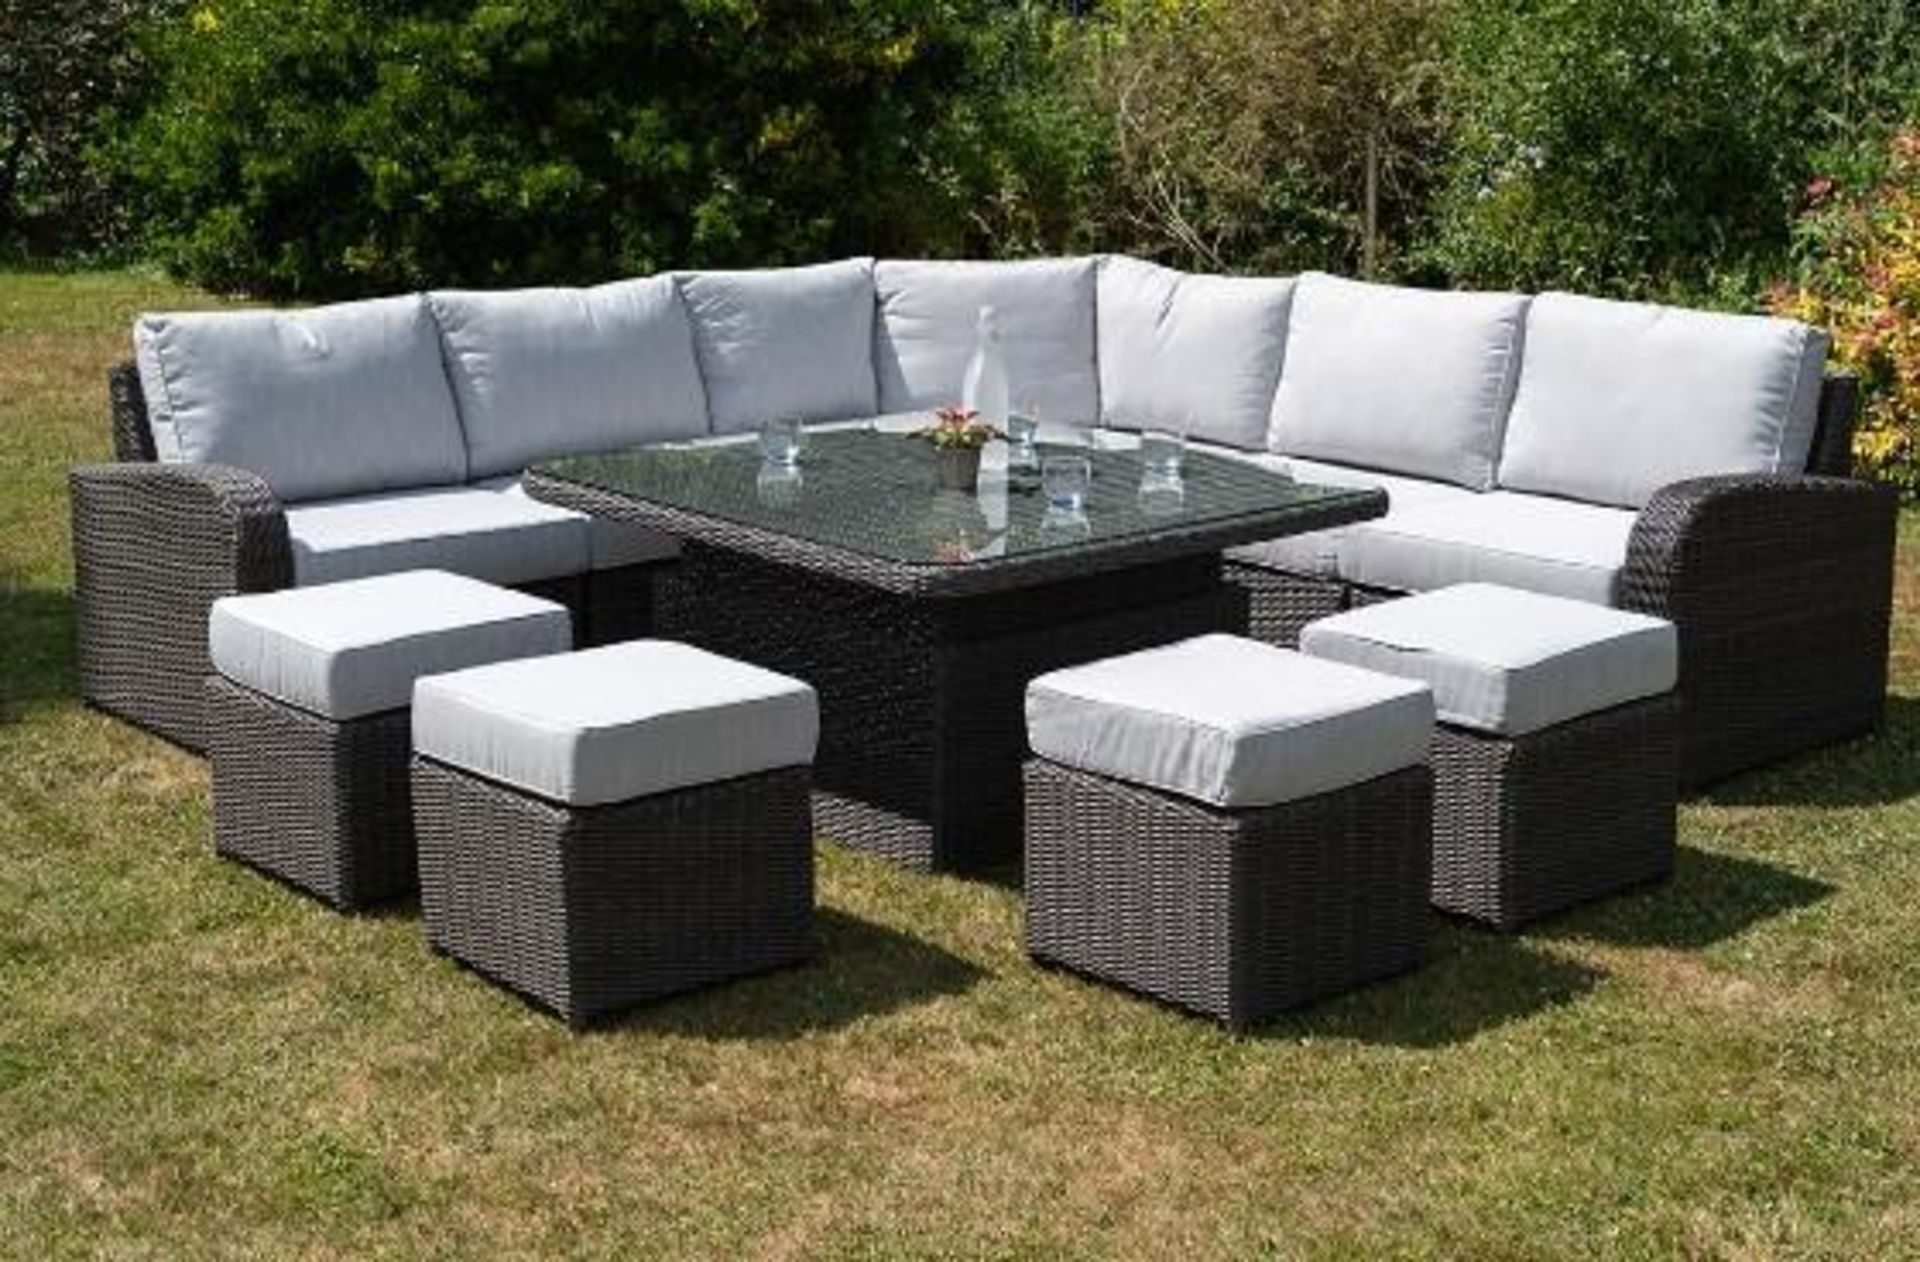 Brand New Moda Furniture, 10 Seater Outdoor Rise and Fall Table Dining Set in Natural with Cream - Image 3 of 12